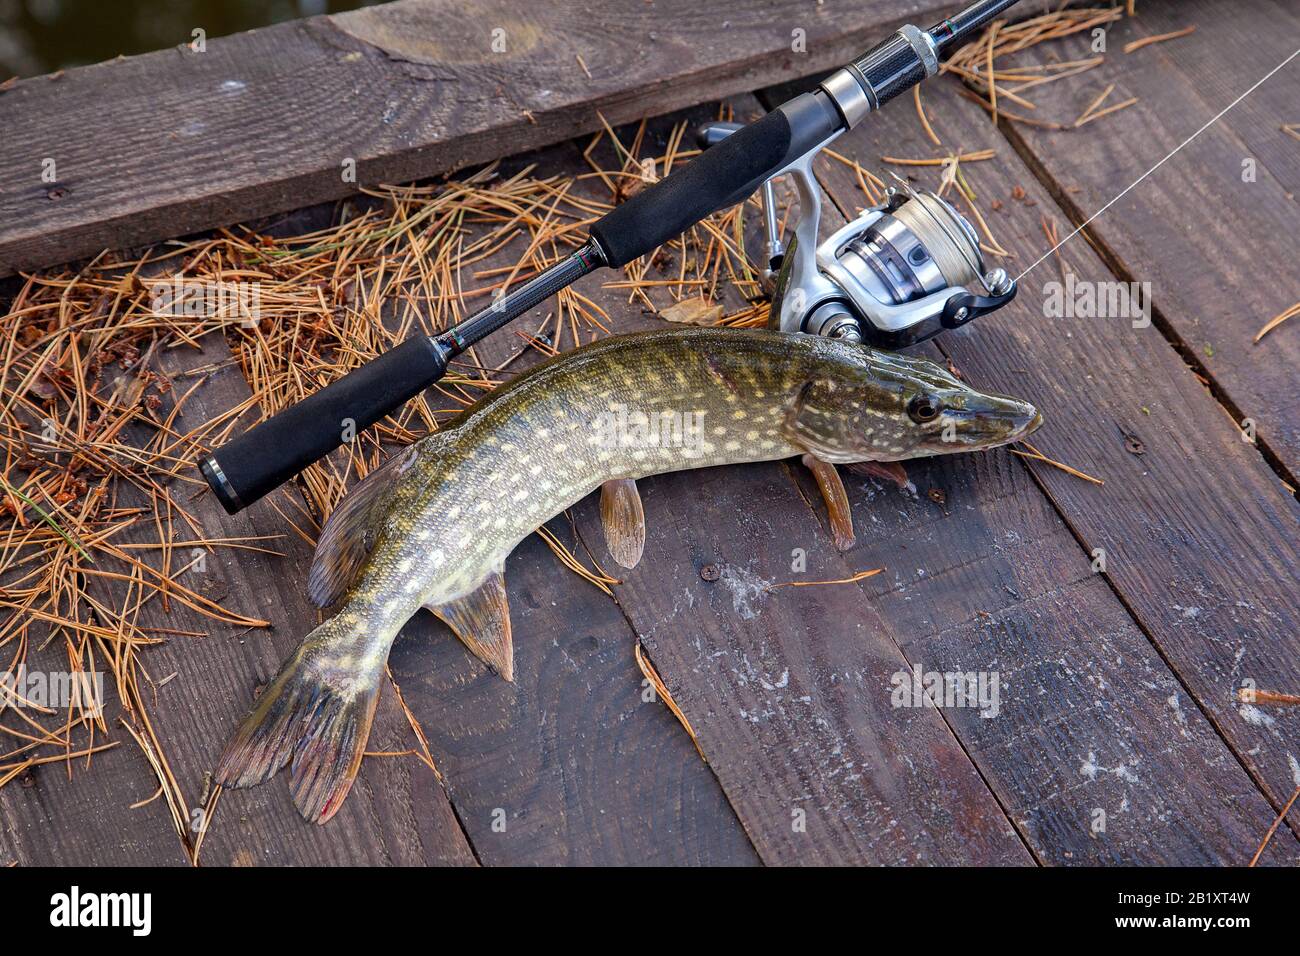 Freshwater Northern pike fish know as Esox Lucius and fishing rod with reel  lying on vintage wooden background with yellow leaves at autumn time. Fish  Stock Photo - Alamy